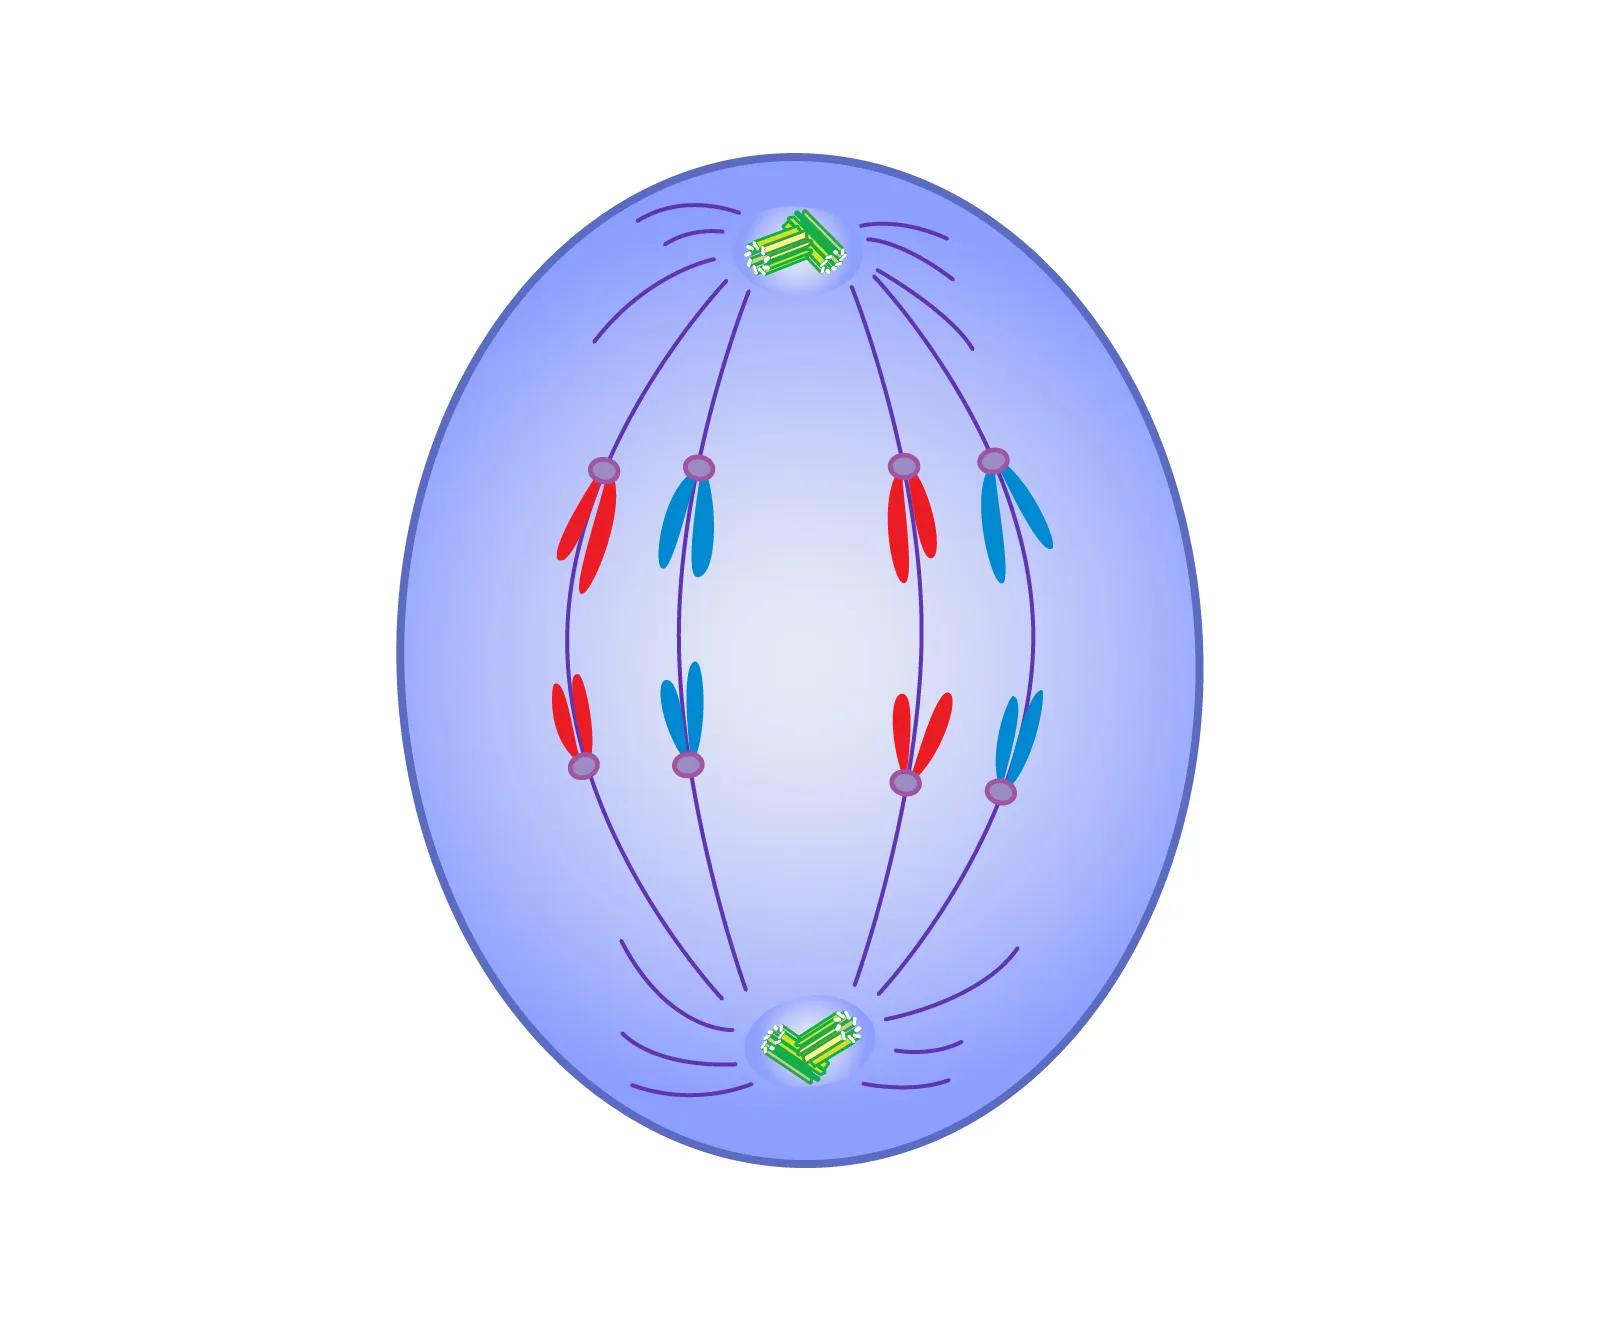 <p>Phase of mitosis in which the sister chromatids separate and move towards opposite poles of the cell.</p>